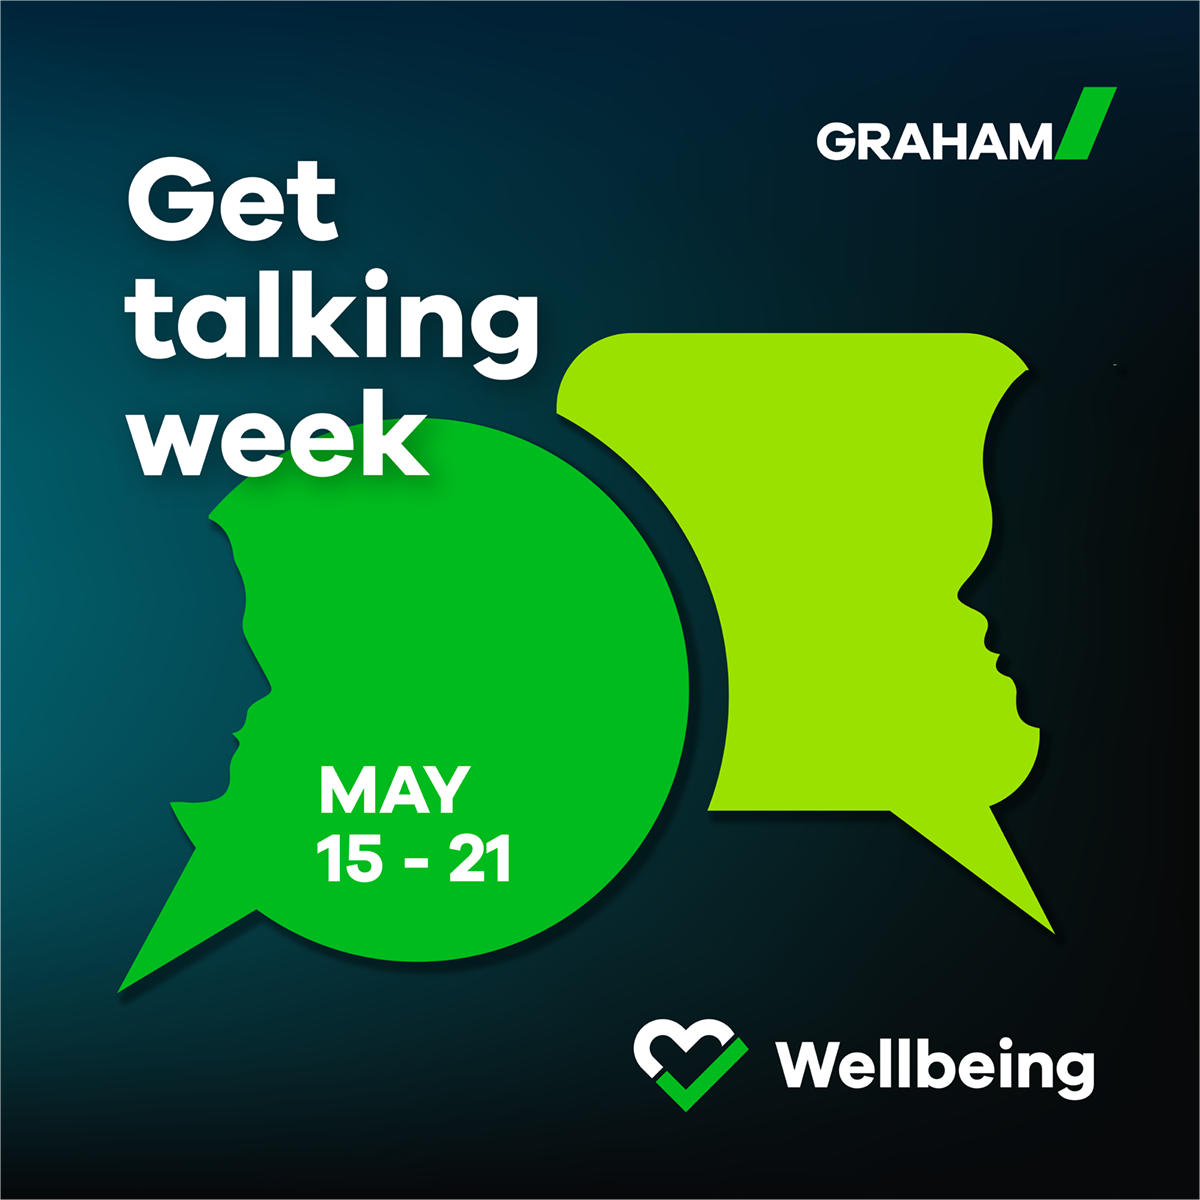 GRAHAM’s “Get Talking Week” thought-provoking content for our employees image